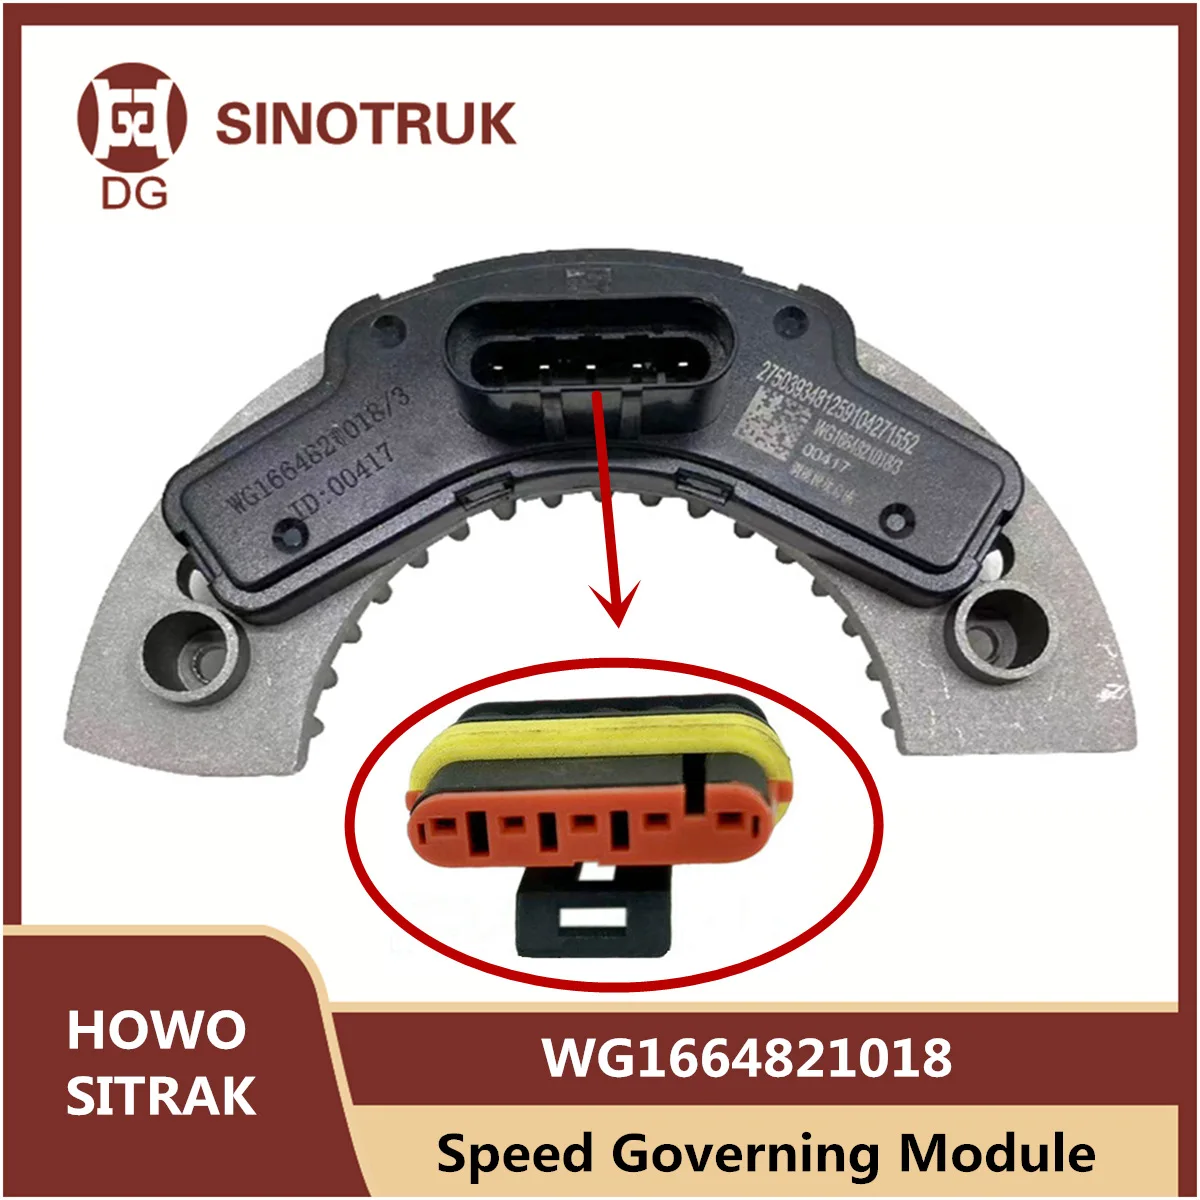 

Speed Governing Module Assembly (Waterproof Connector) WG1664821018 For SINOTRUK HOWO T7H C7H SITRAK T5G TX Blower Air Heater